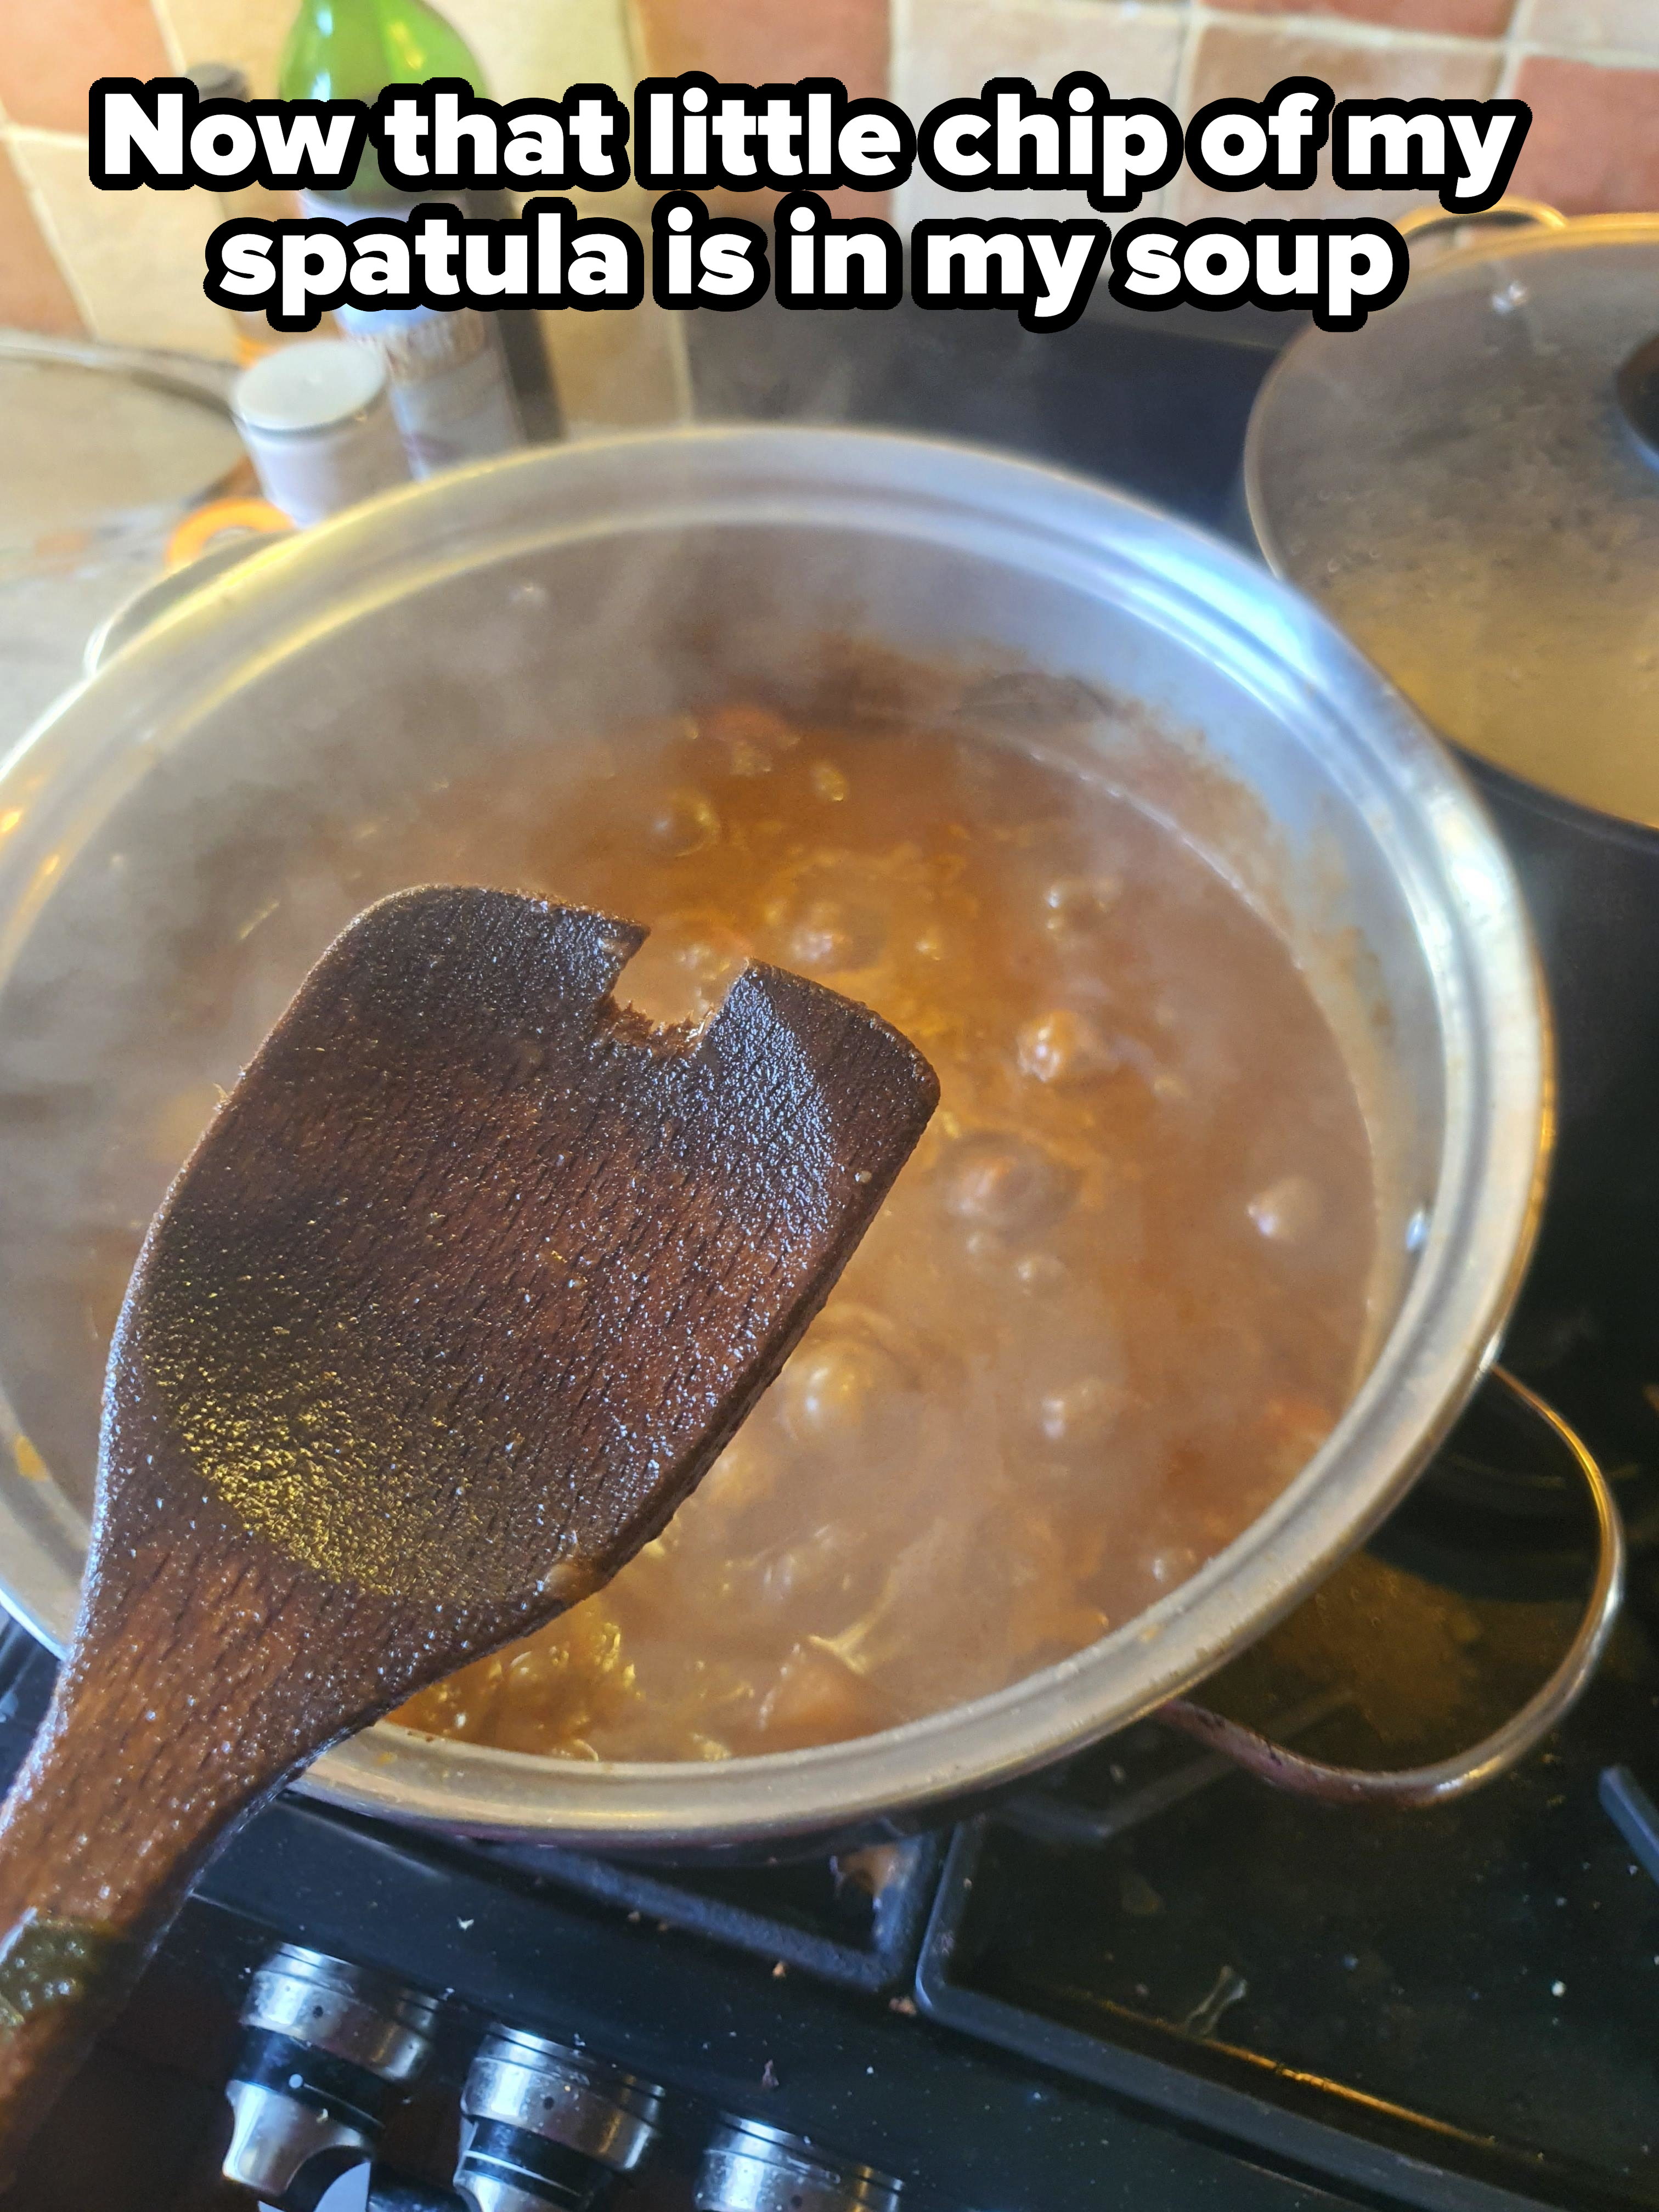 A wooden spoon held over a pot of boiling soup on a stove